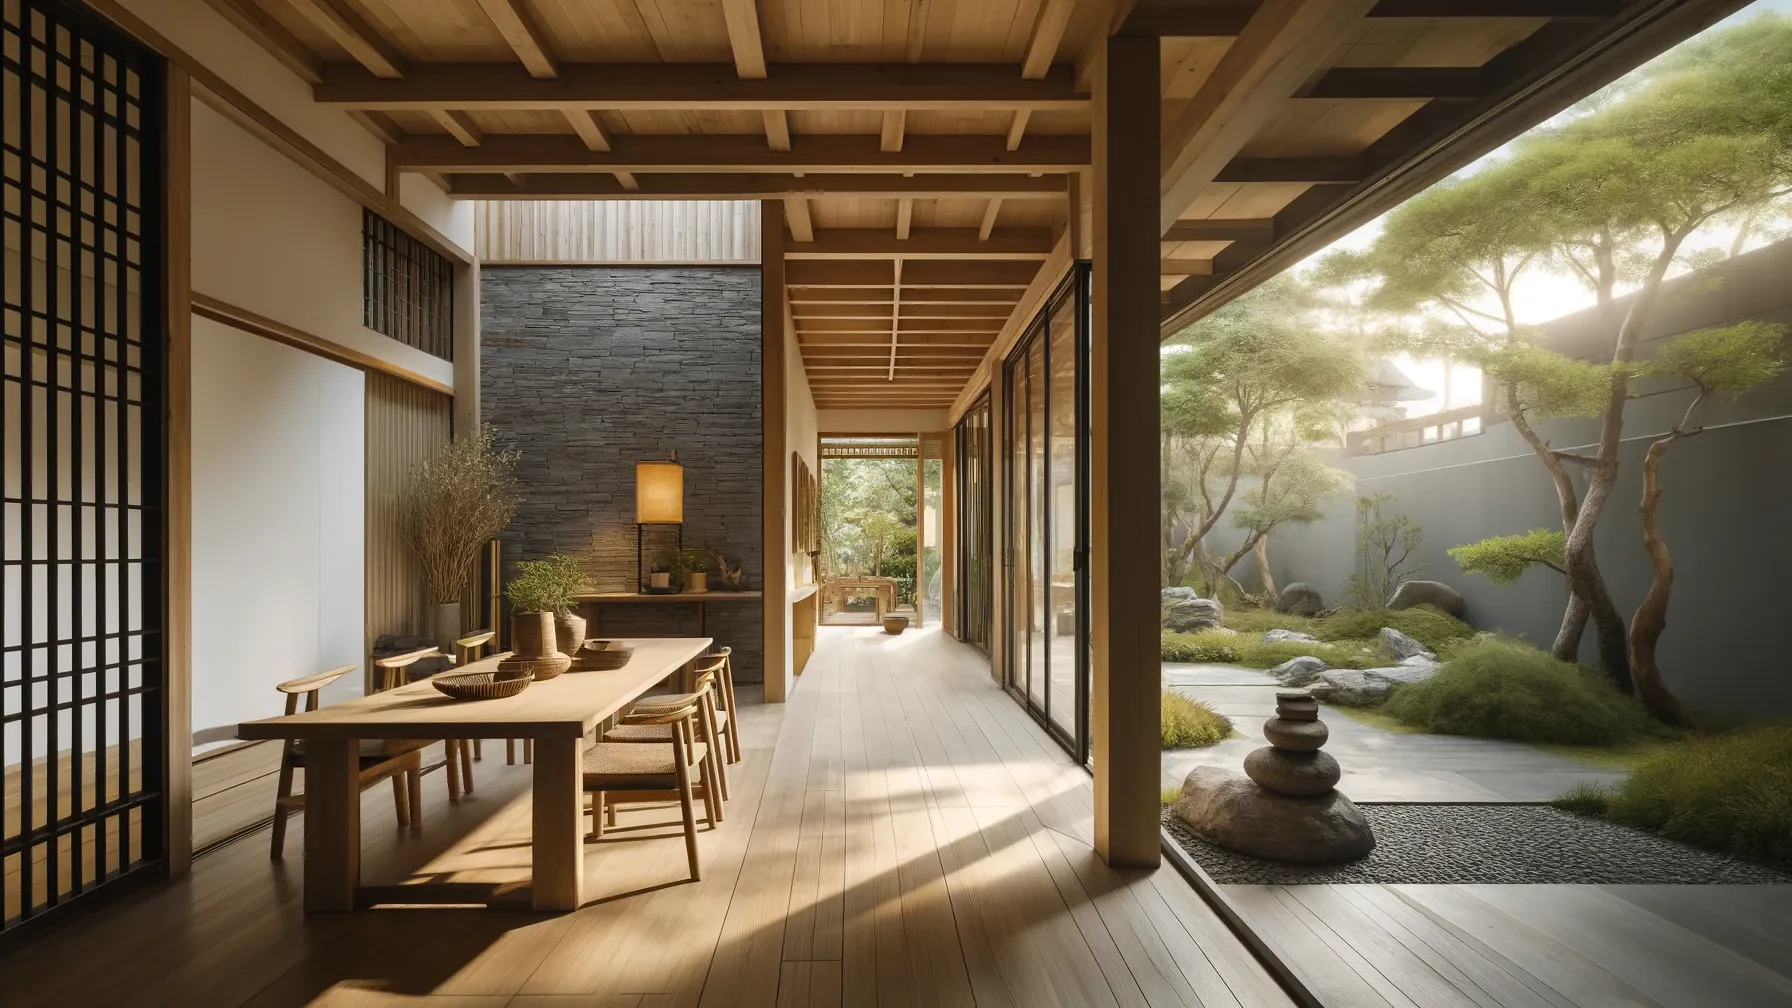 A modern home interior showcasing the use of natural materials in Zen design